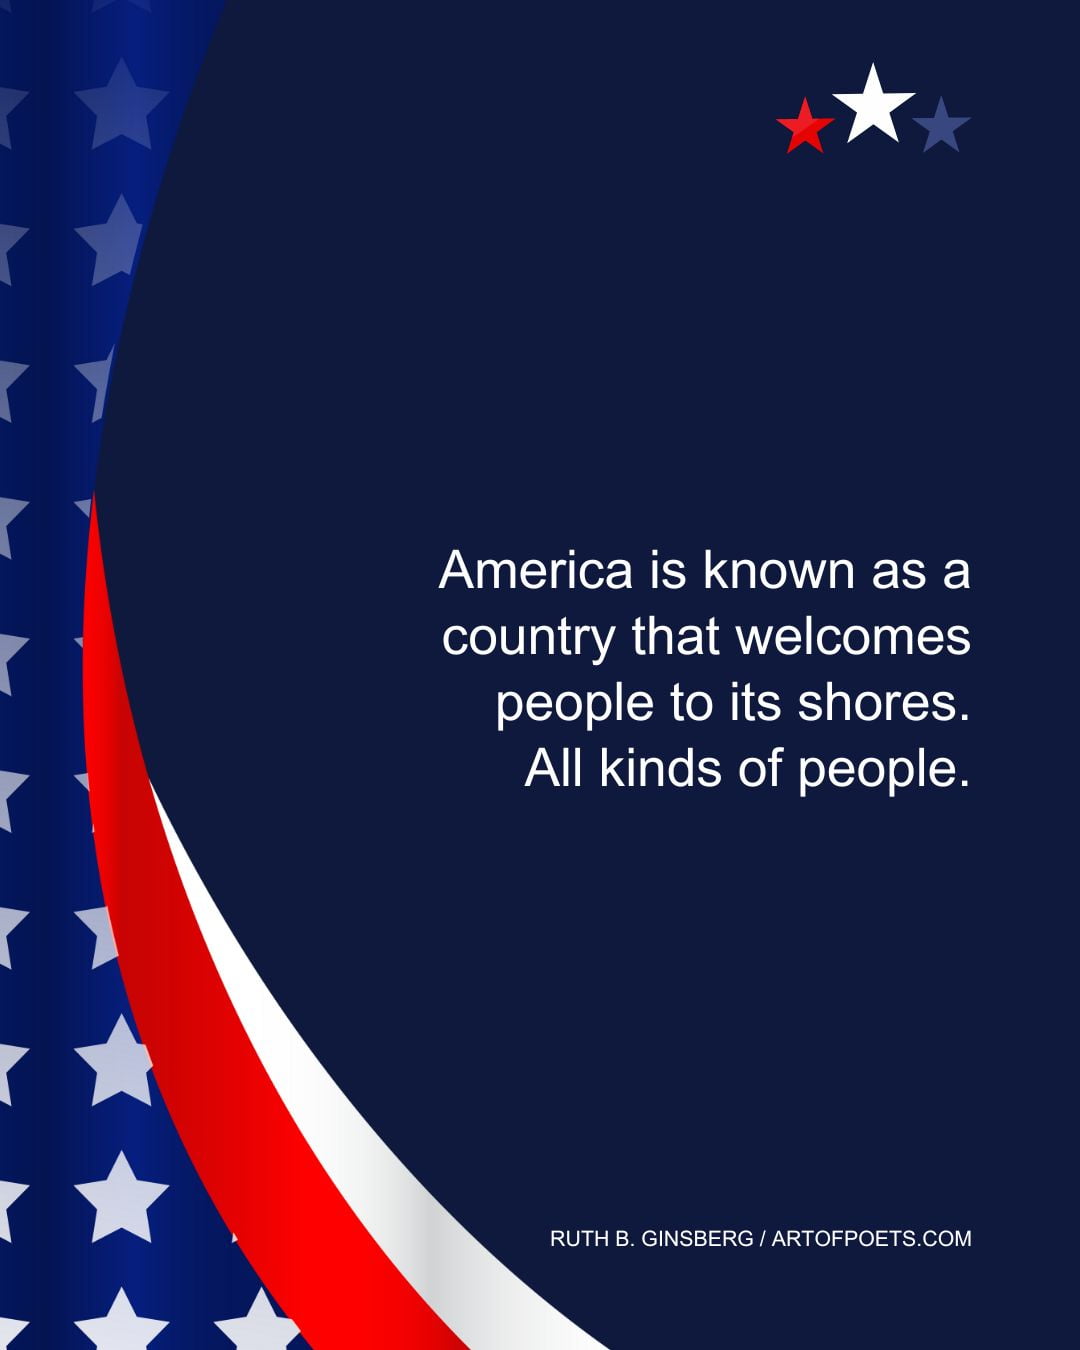 America is known as a country that welcomes people to its shores. All kinds of people